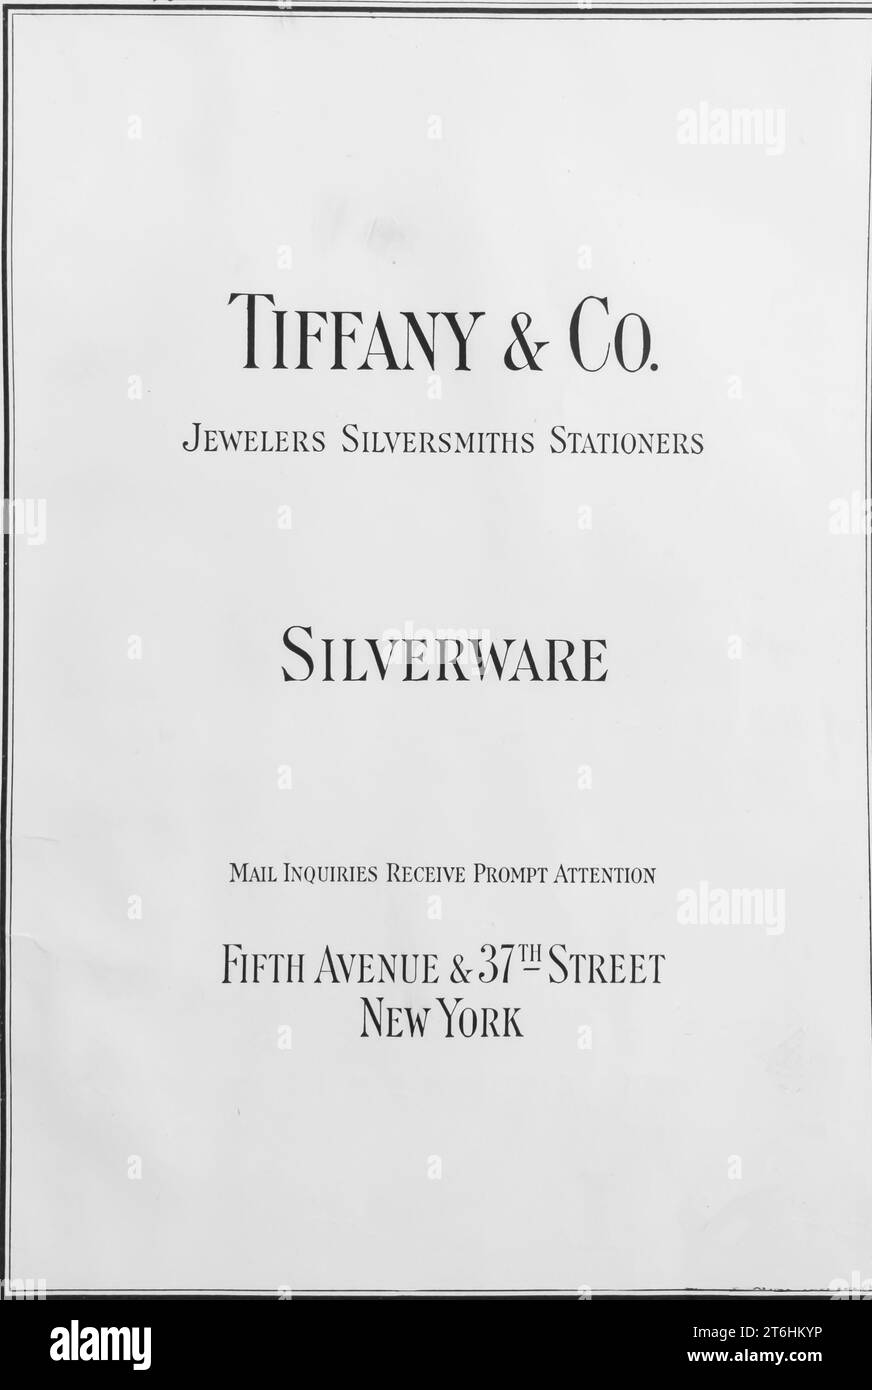 1927 Tiffany & Co jewelers silversmiths stationers, Silverware ad. Fifth Avenue & 37th street New York Stock Photo